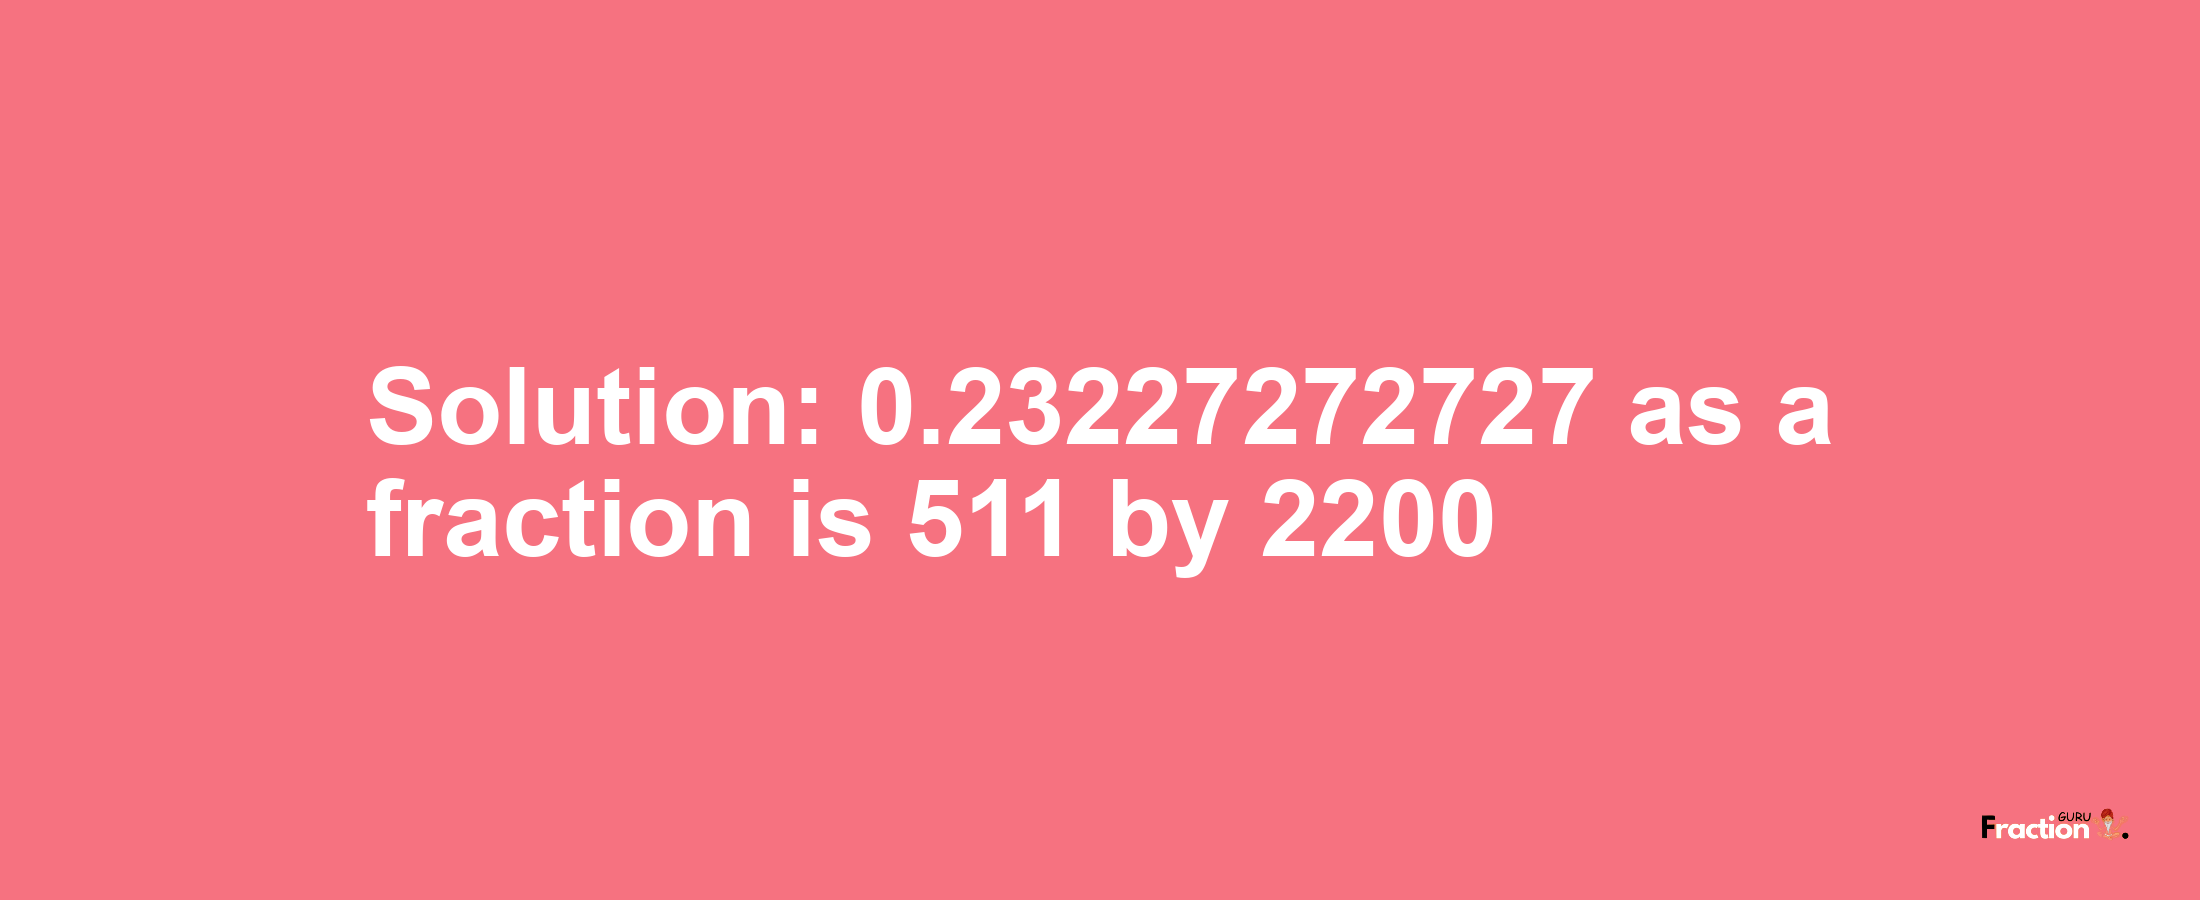 Solution:0.23227272727 as a fraction is 511/2200